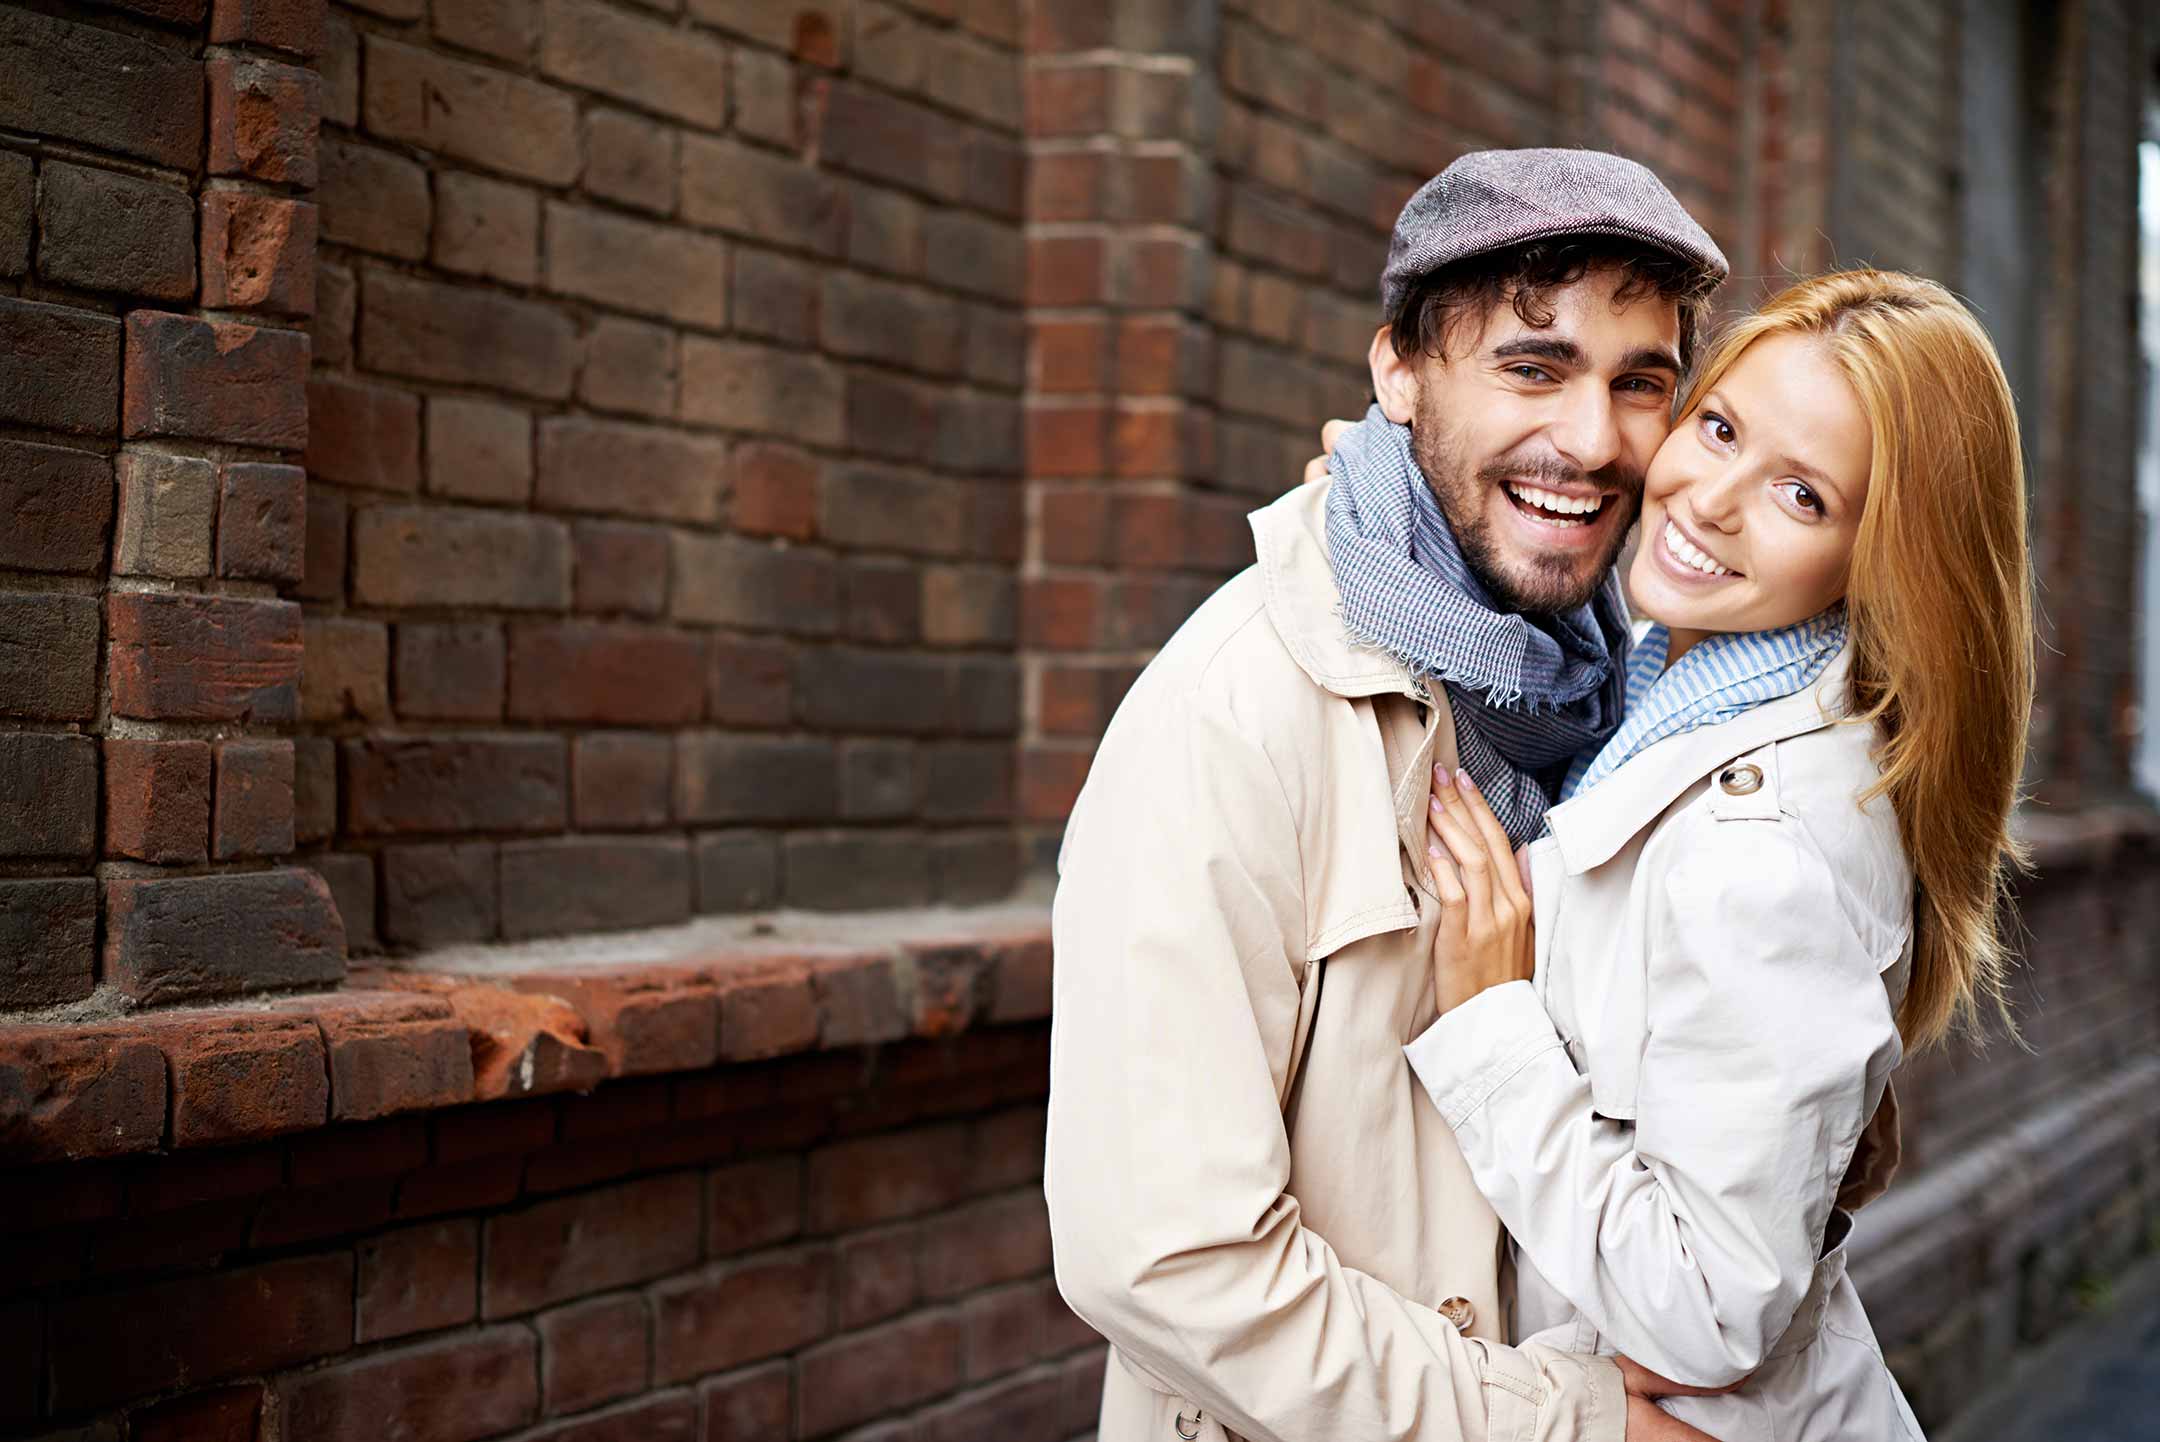 A smiling couple embracing next to a brick building.